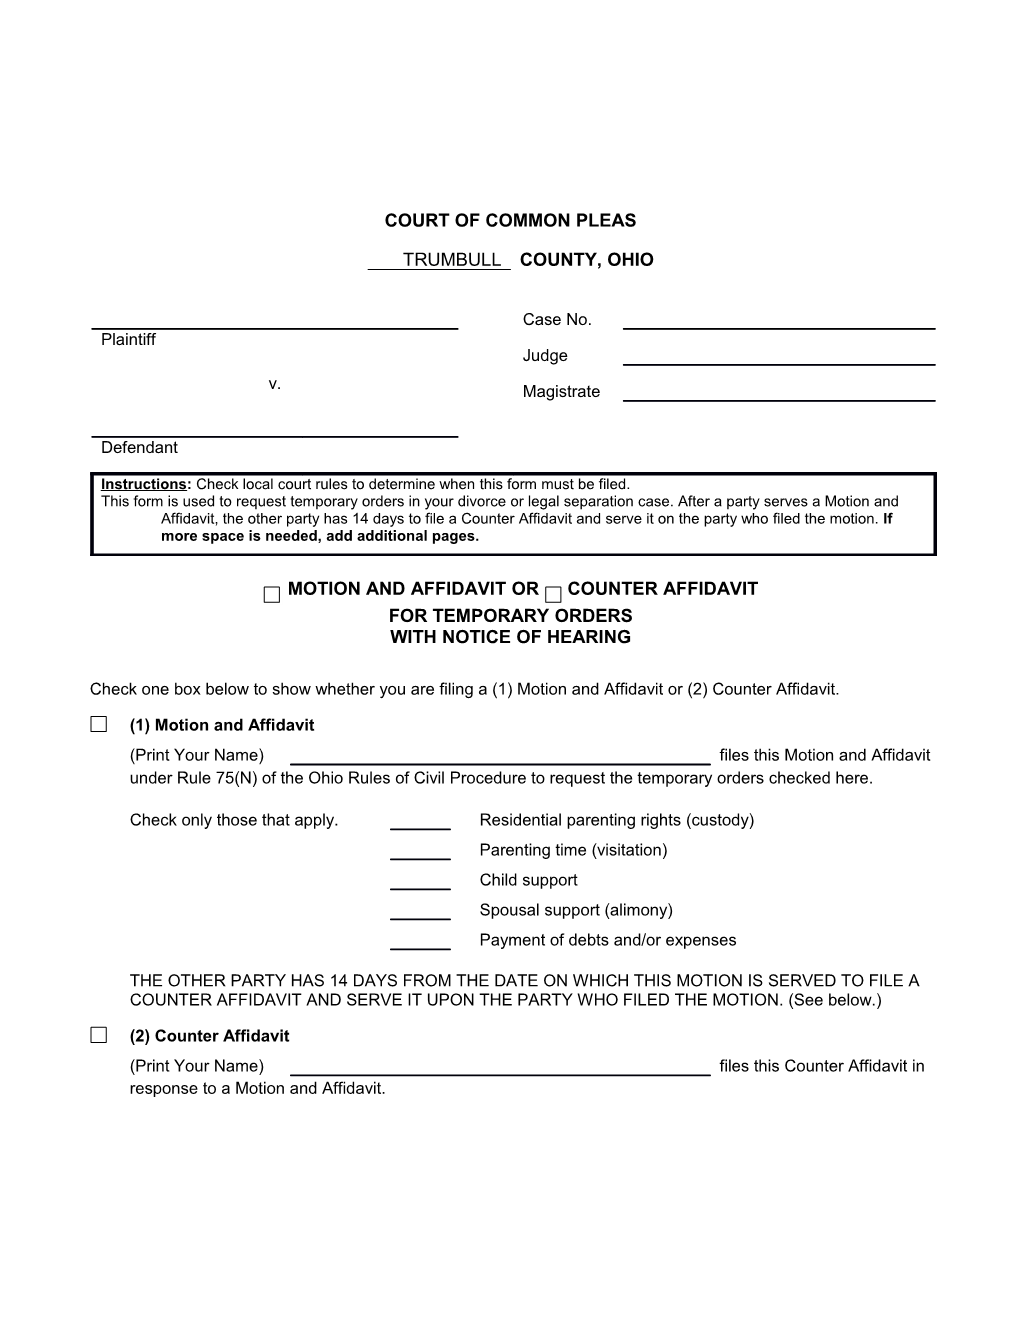 Instructions: Check Local Court Rules to Determine When This Form Must Be Filed